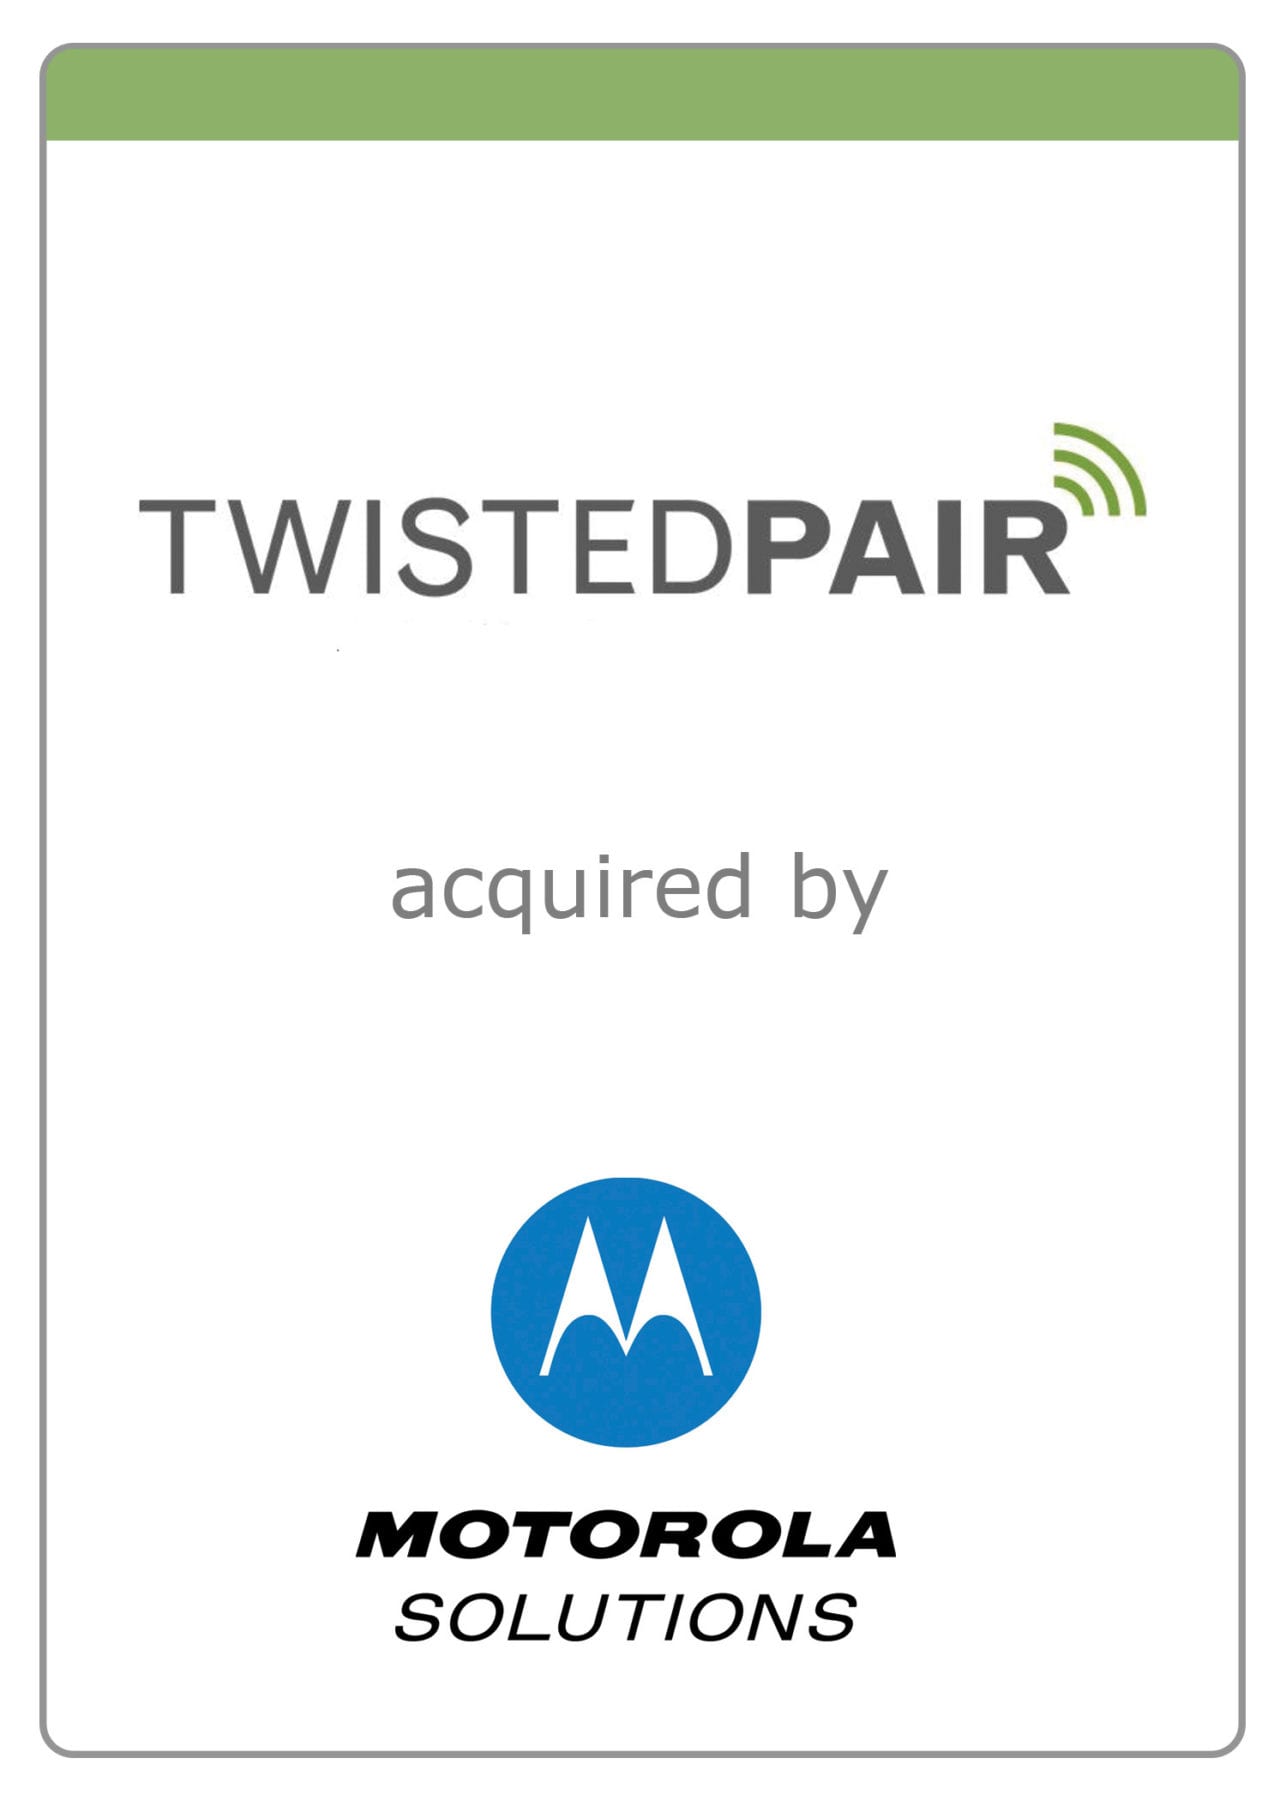 TwistedPair acquired by Motorola - The McLean Group